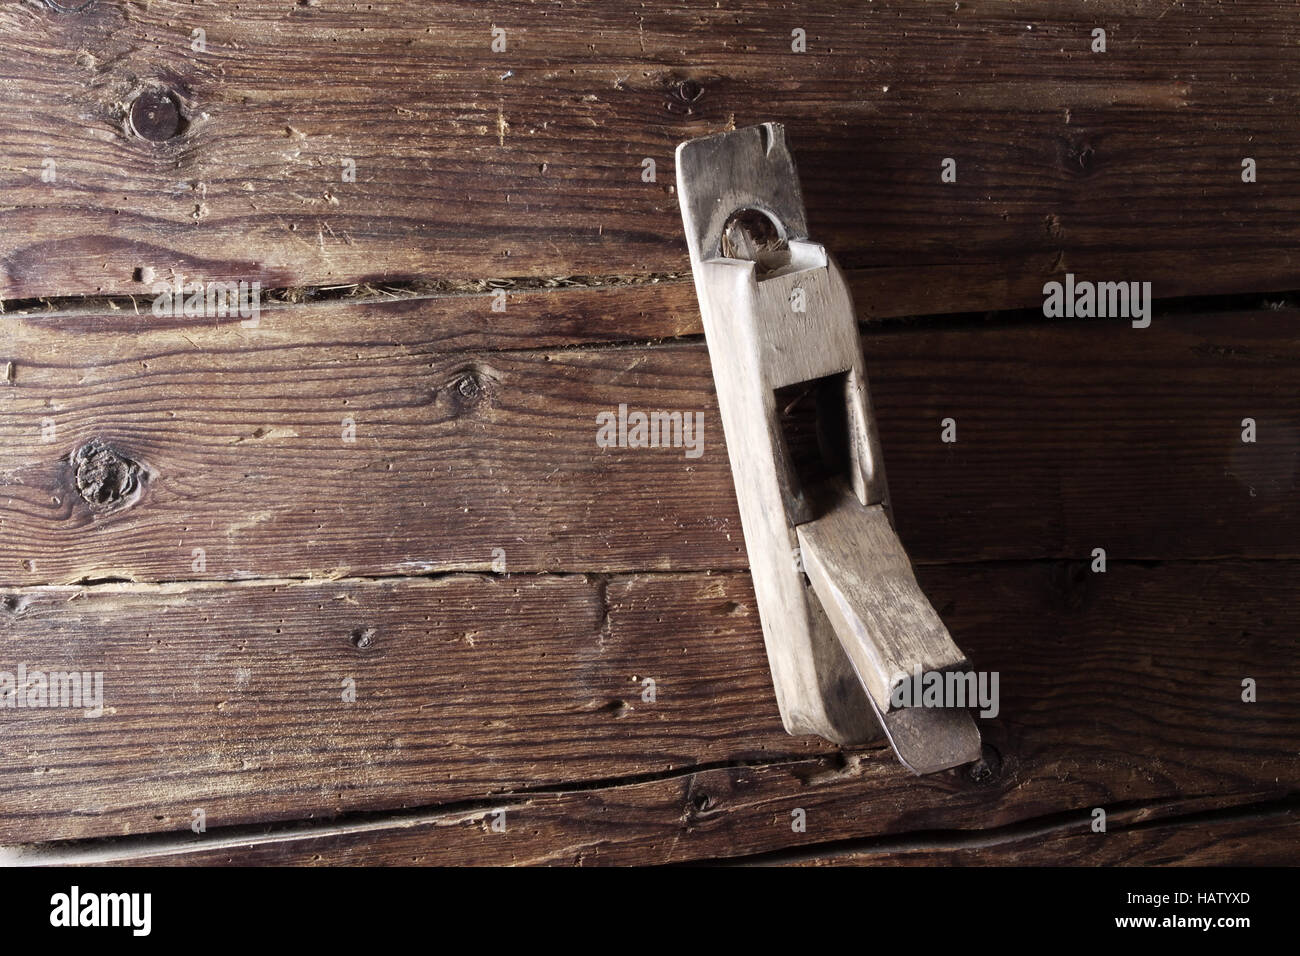 old wooden planer Stock Photo